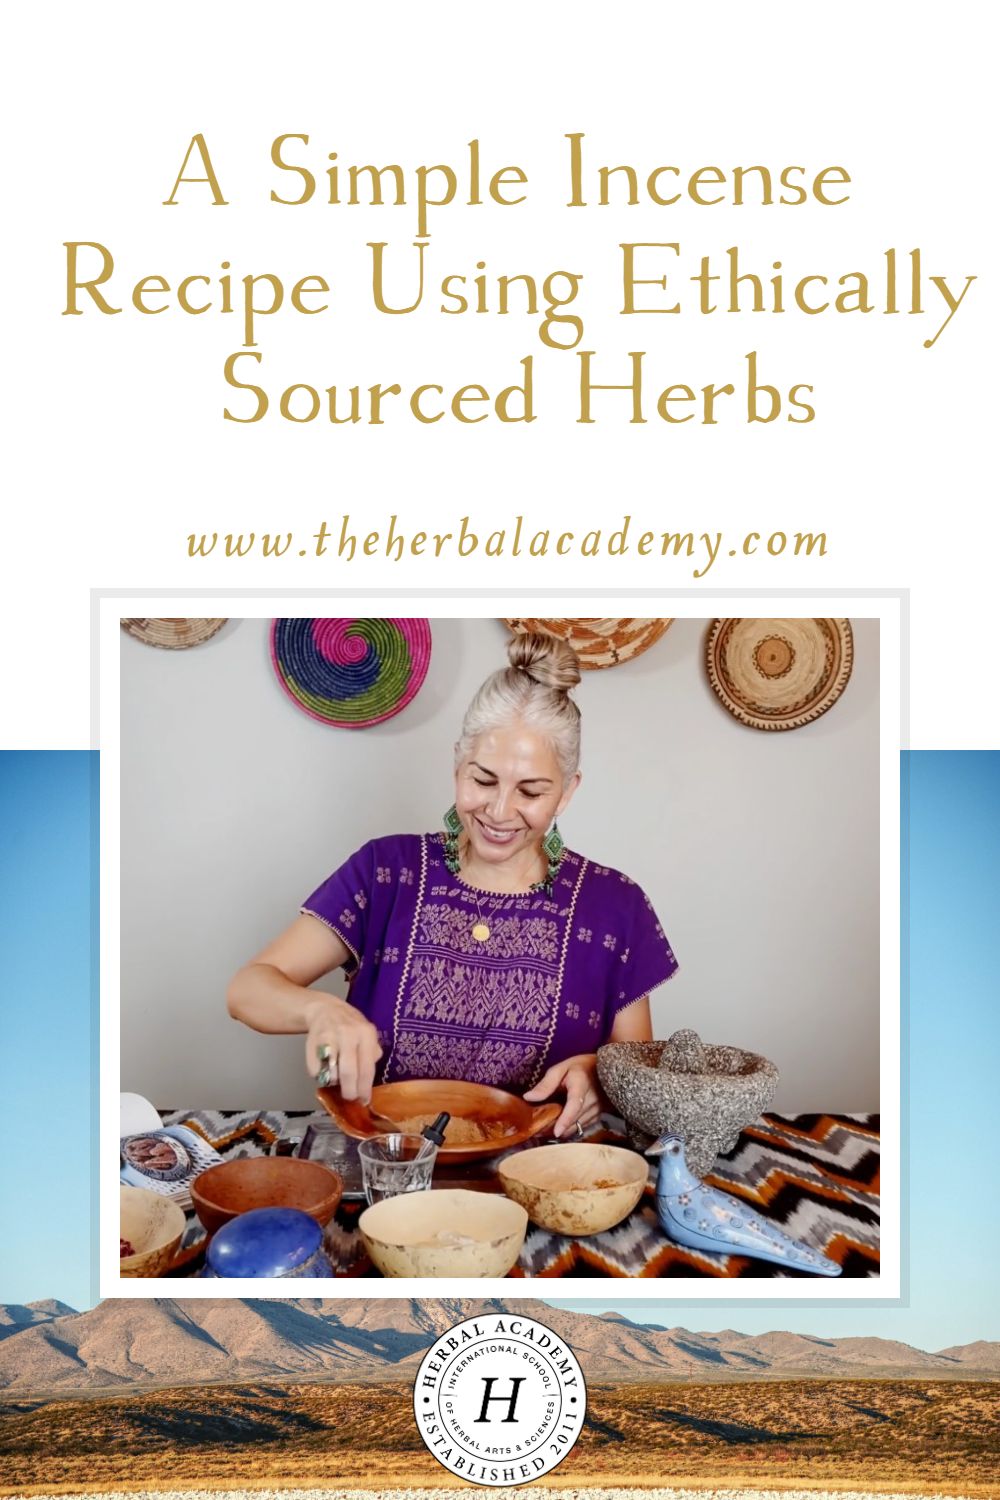 A Simple Incense Recipe Using Ethically Sourced Herbs | Herbal Academy | This article shares a simple way of connecting to this Air element as well as an incense recipe using ethically sourced herbs.